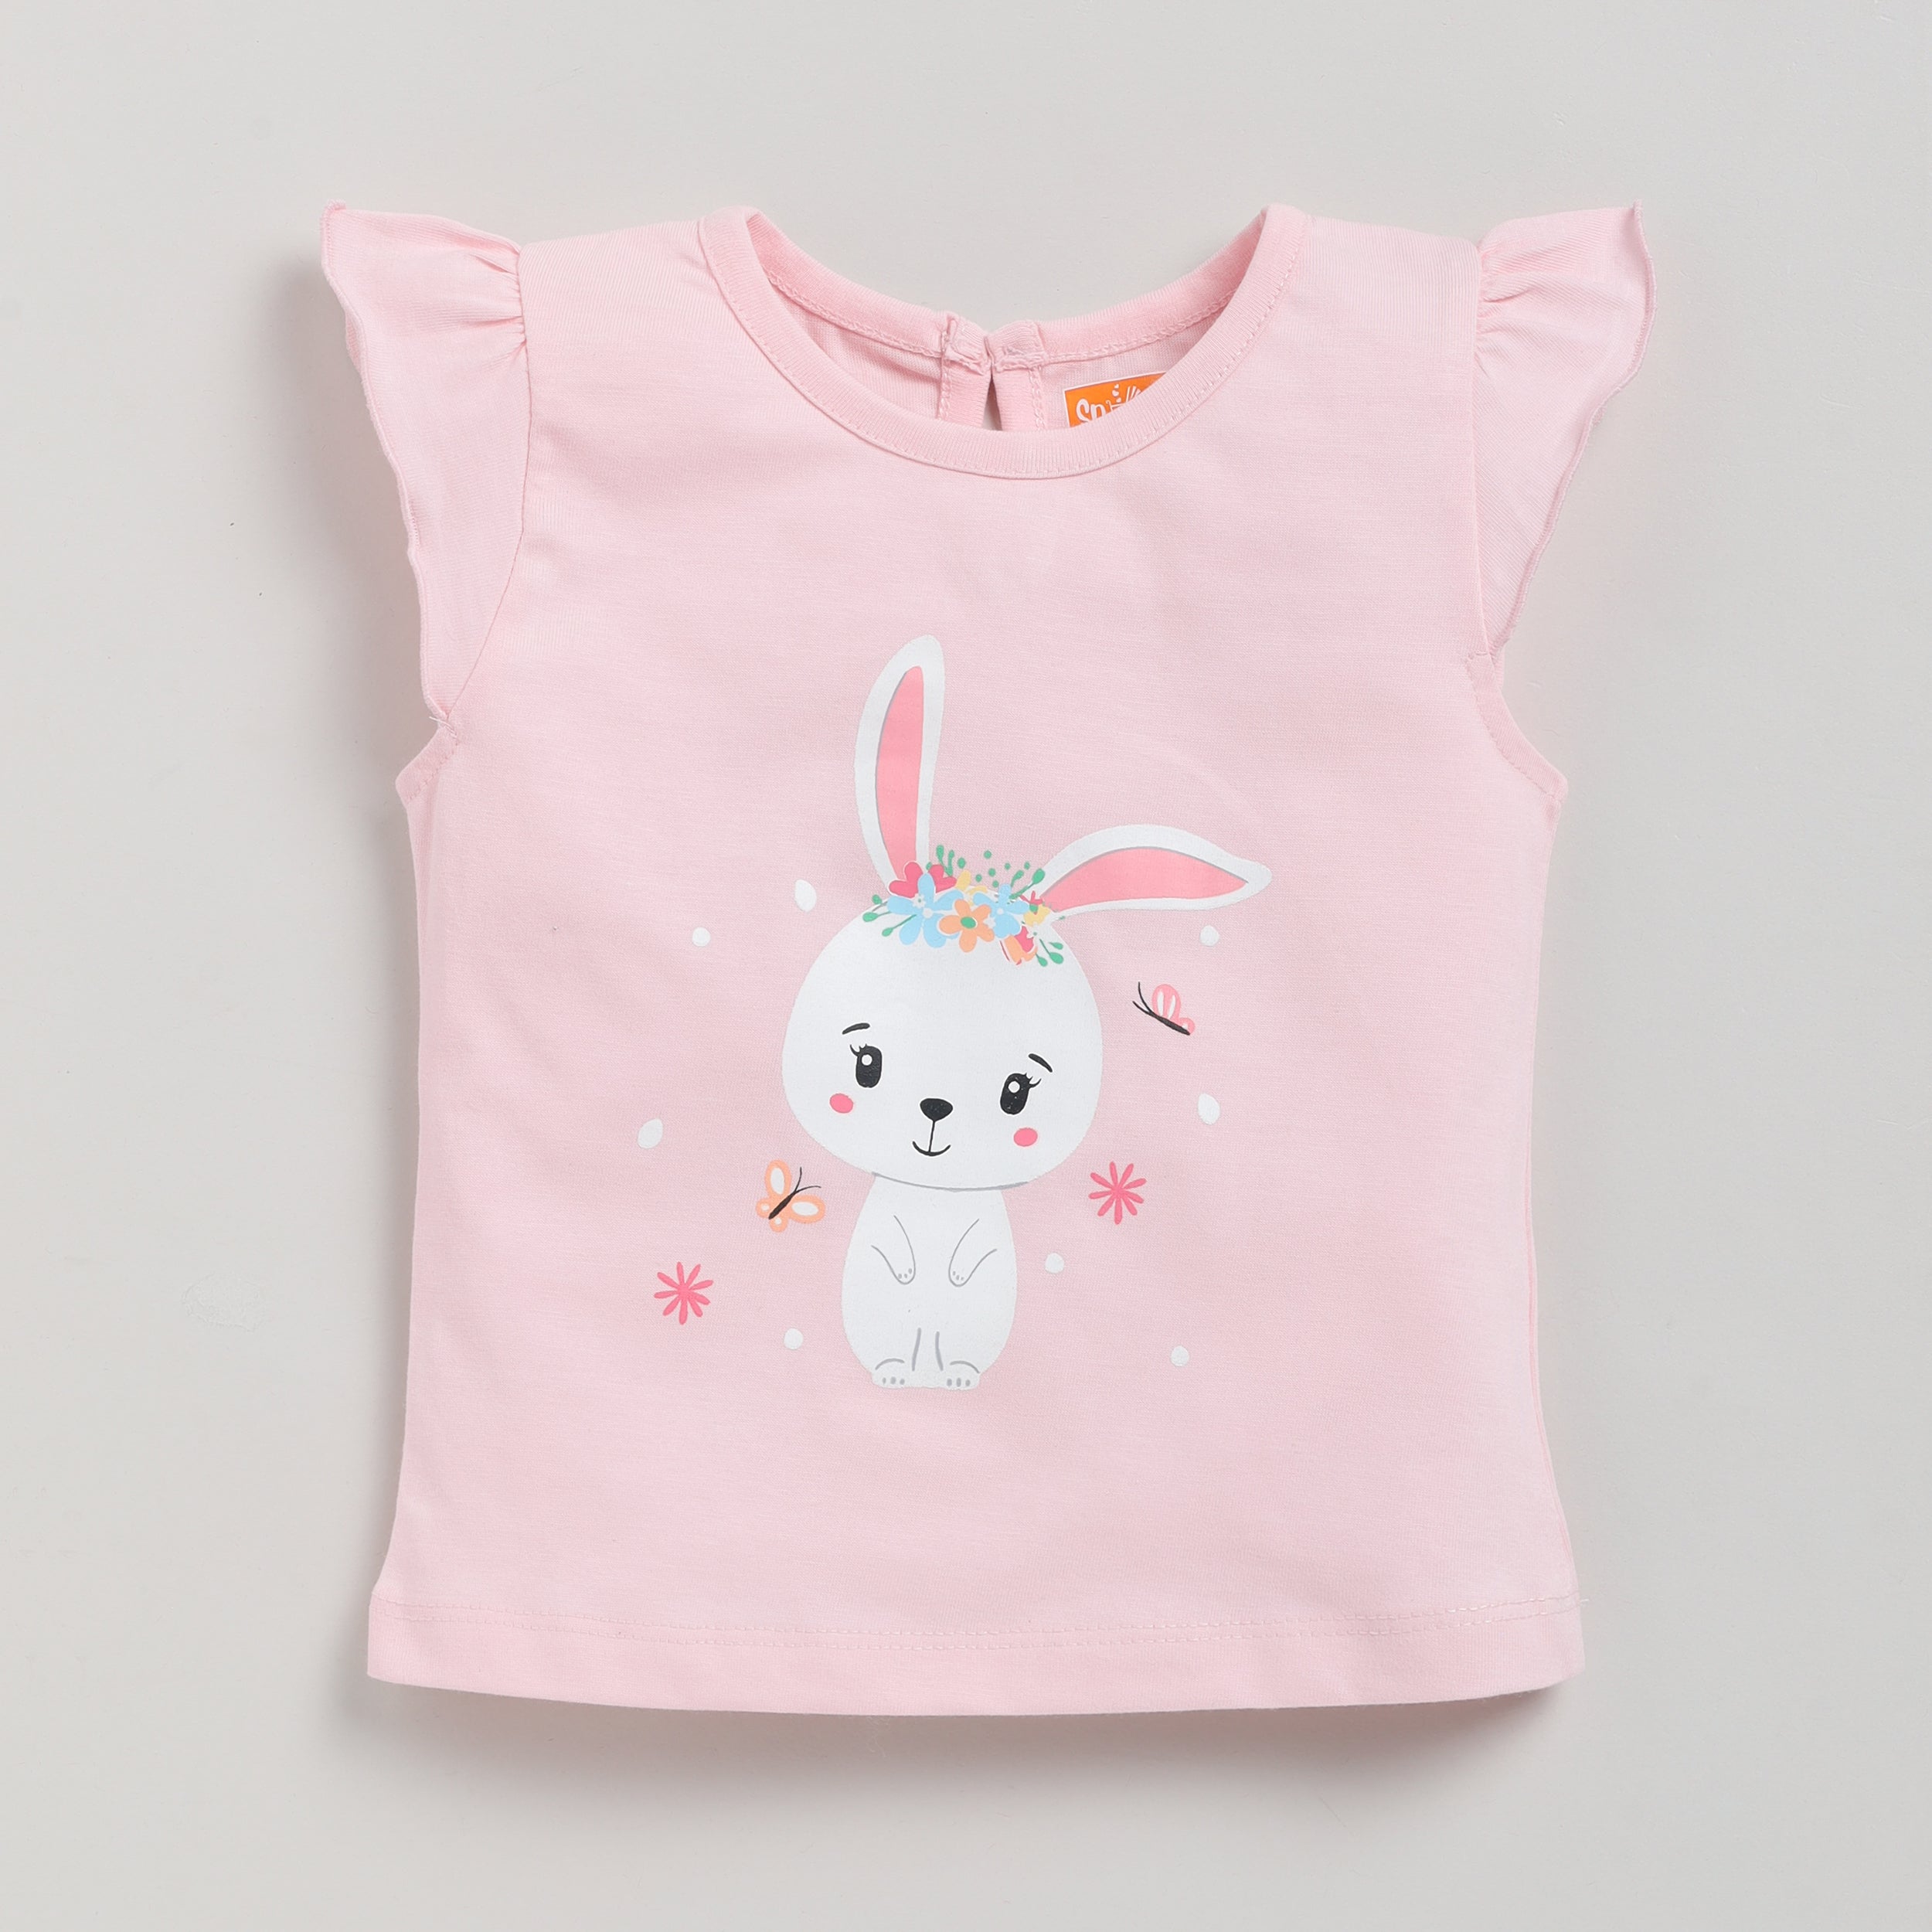 Snuggly Monkey Girls Pink Bunny Print Top with Shorts